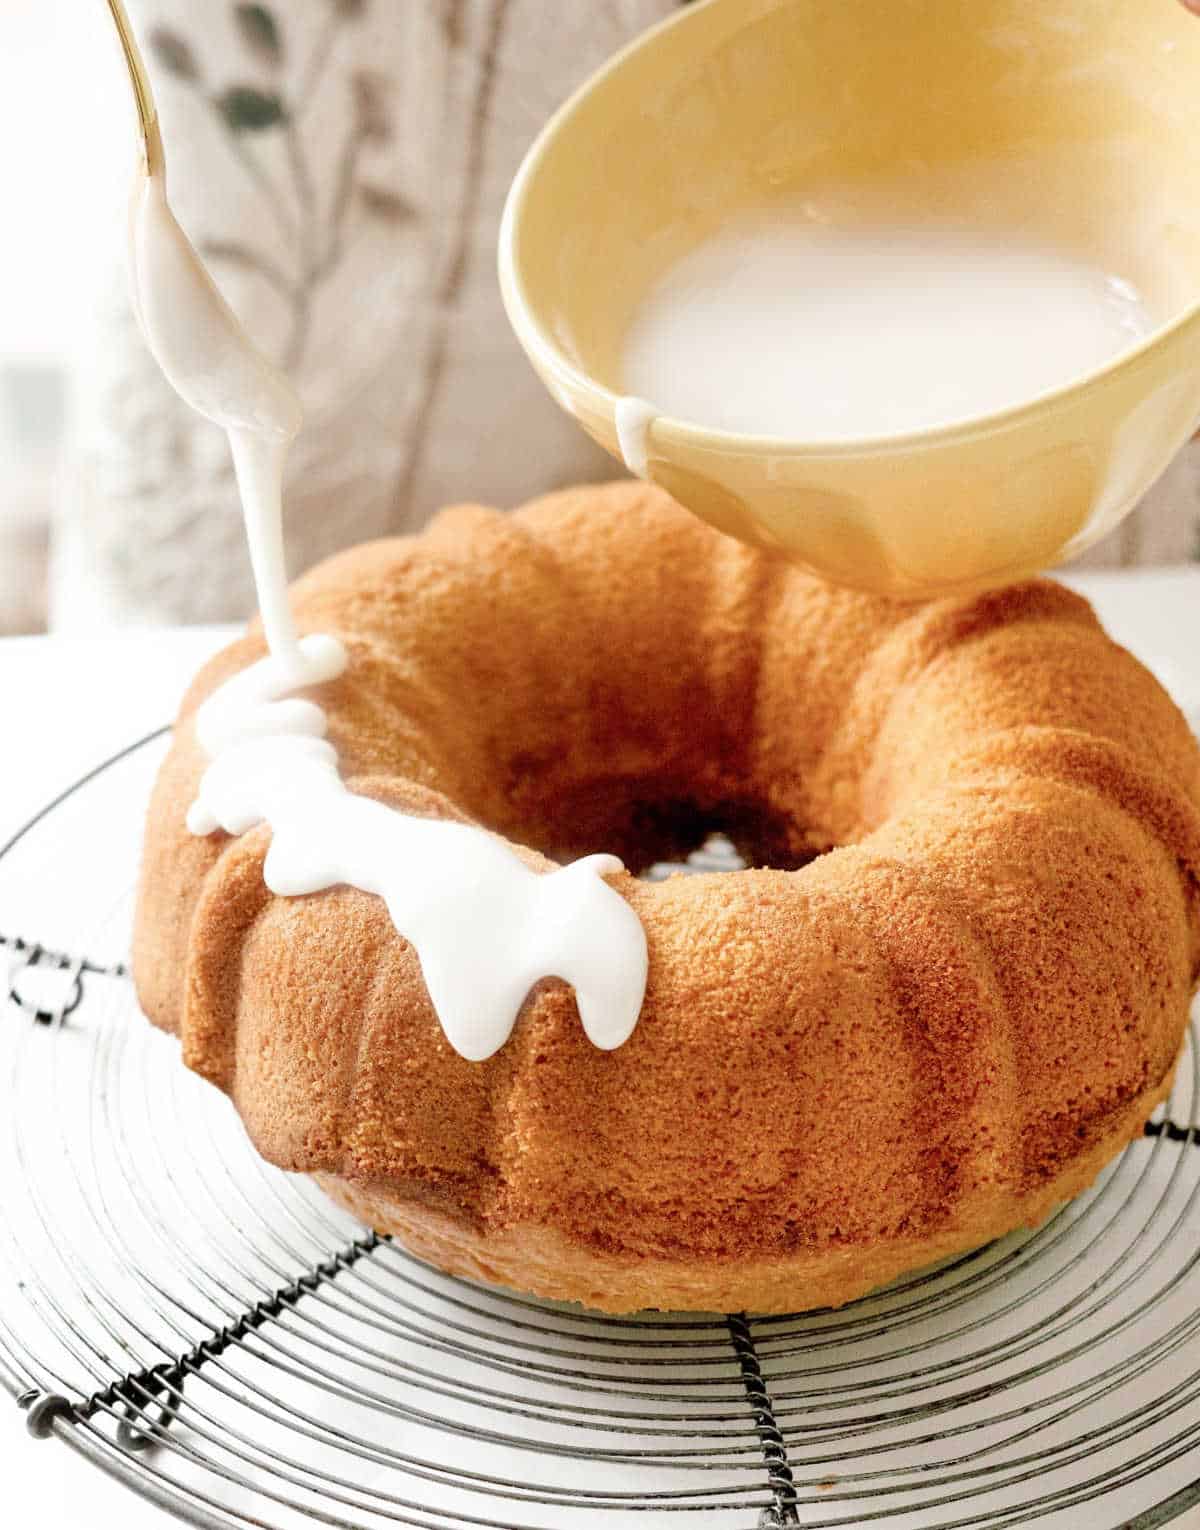 Icing a bundt cake on a wire rack with powdered sugar glaze from a yellow bowl.